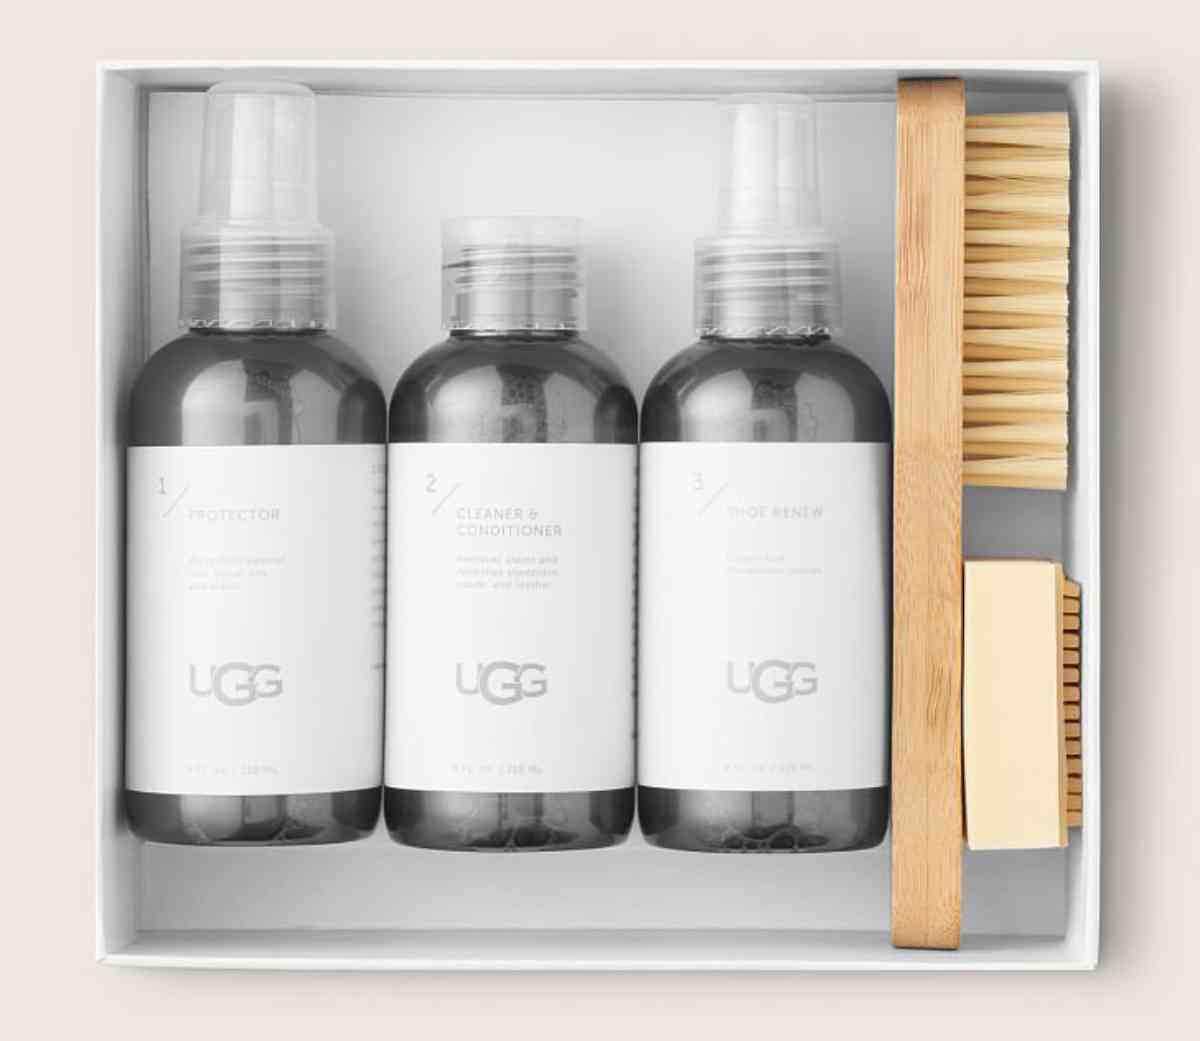 How to Clean Ugg Boots: Using Ugg Care Kit ☼ 